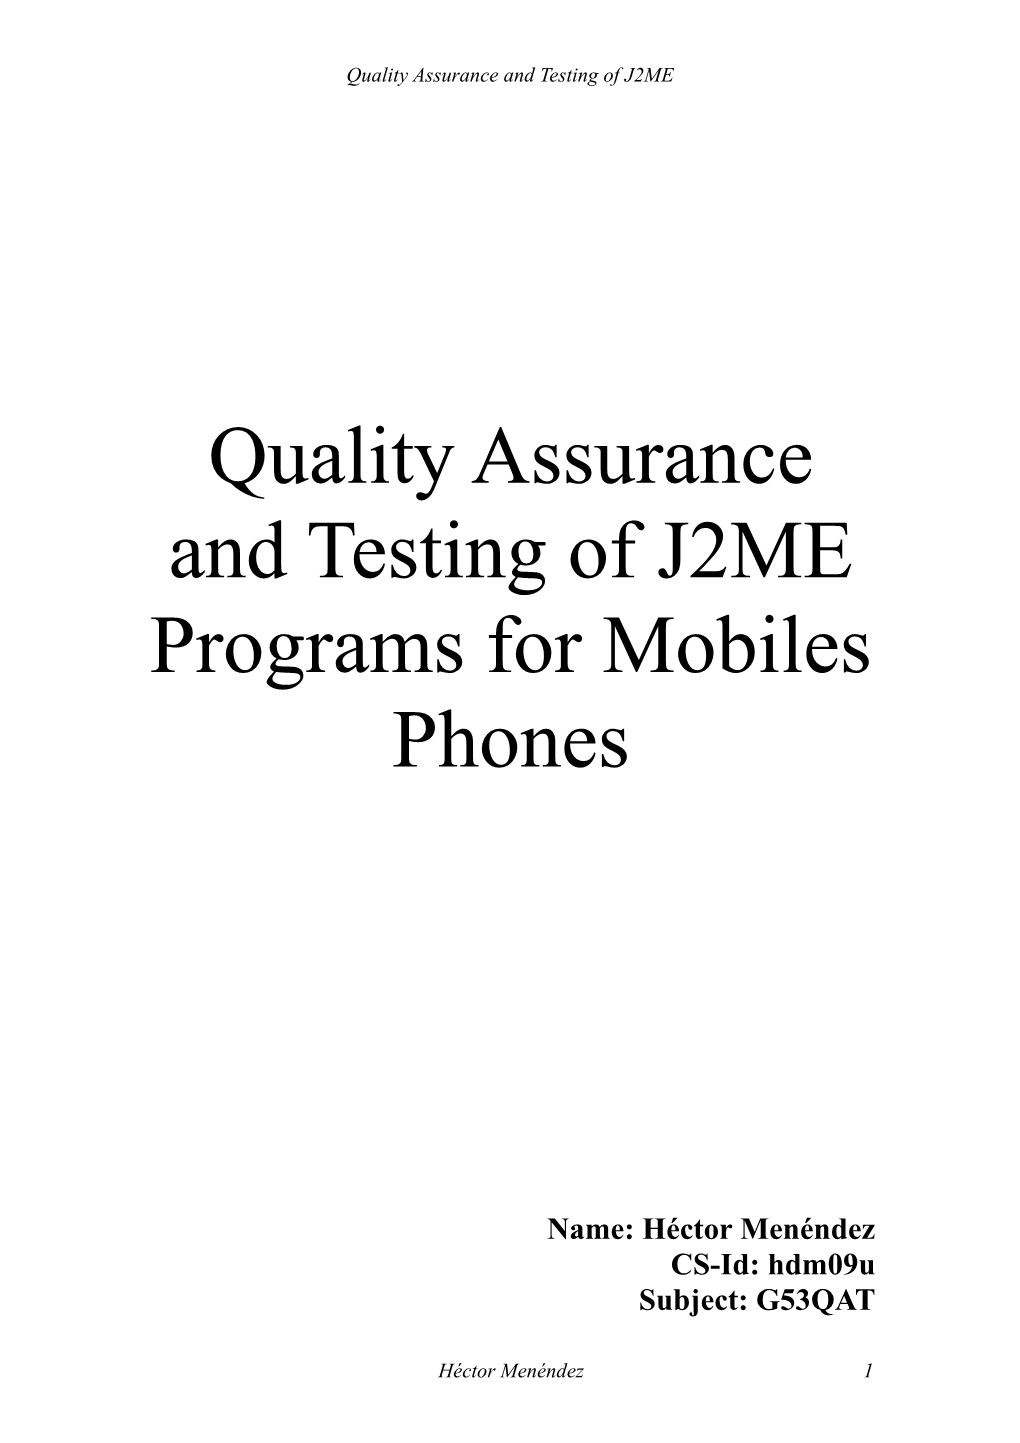 Quality Assurance and Testing of J2ME Programs for Mobiles Phones